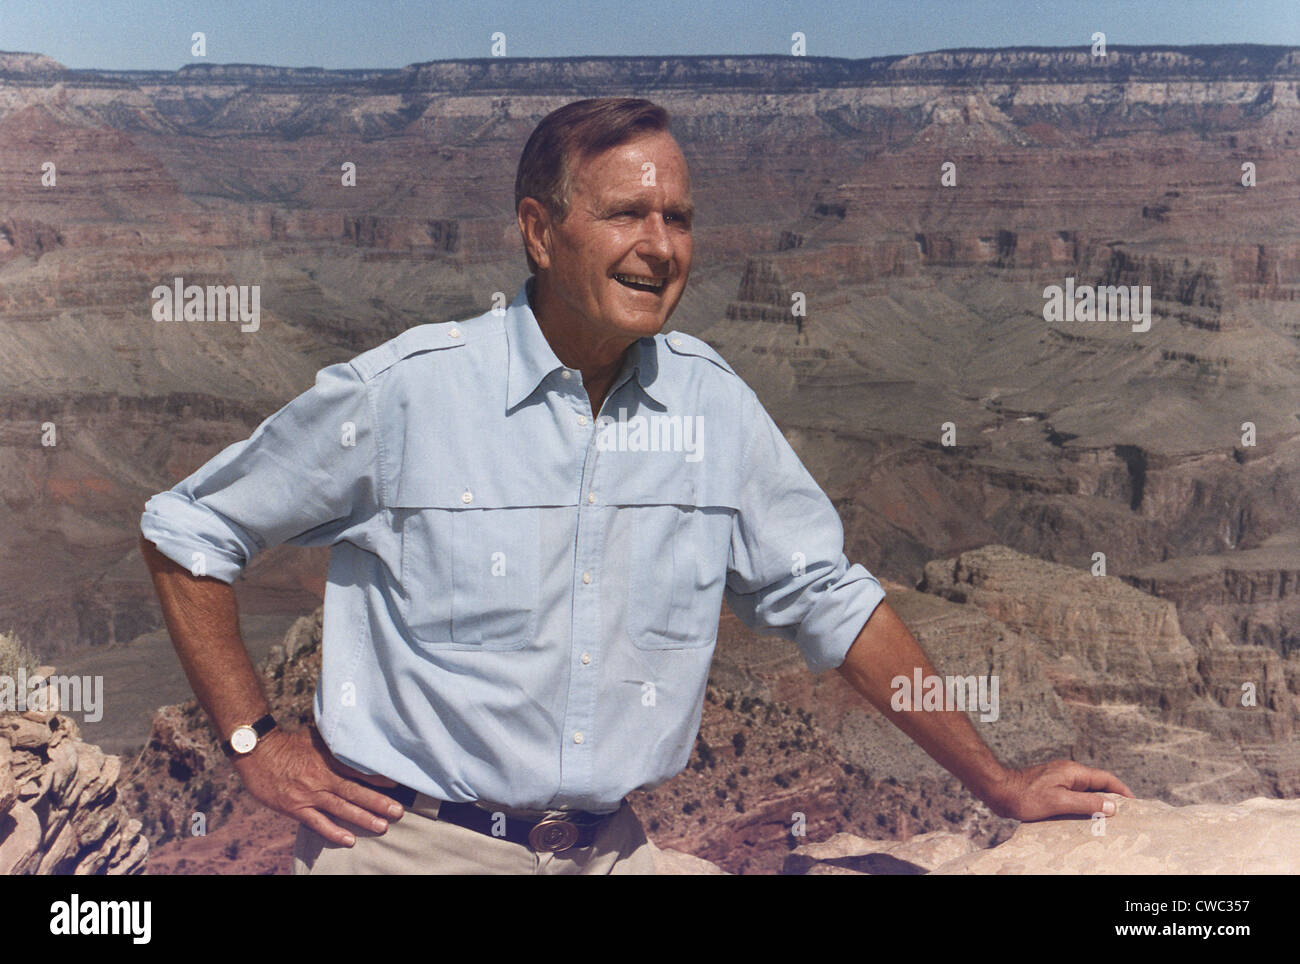 President Bush hiking on the Kaibab Trail at the Grand Canyon in Arizona. 1991. (BSLOC 2011 3 70) Stock Photo